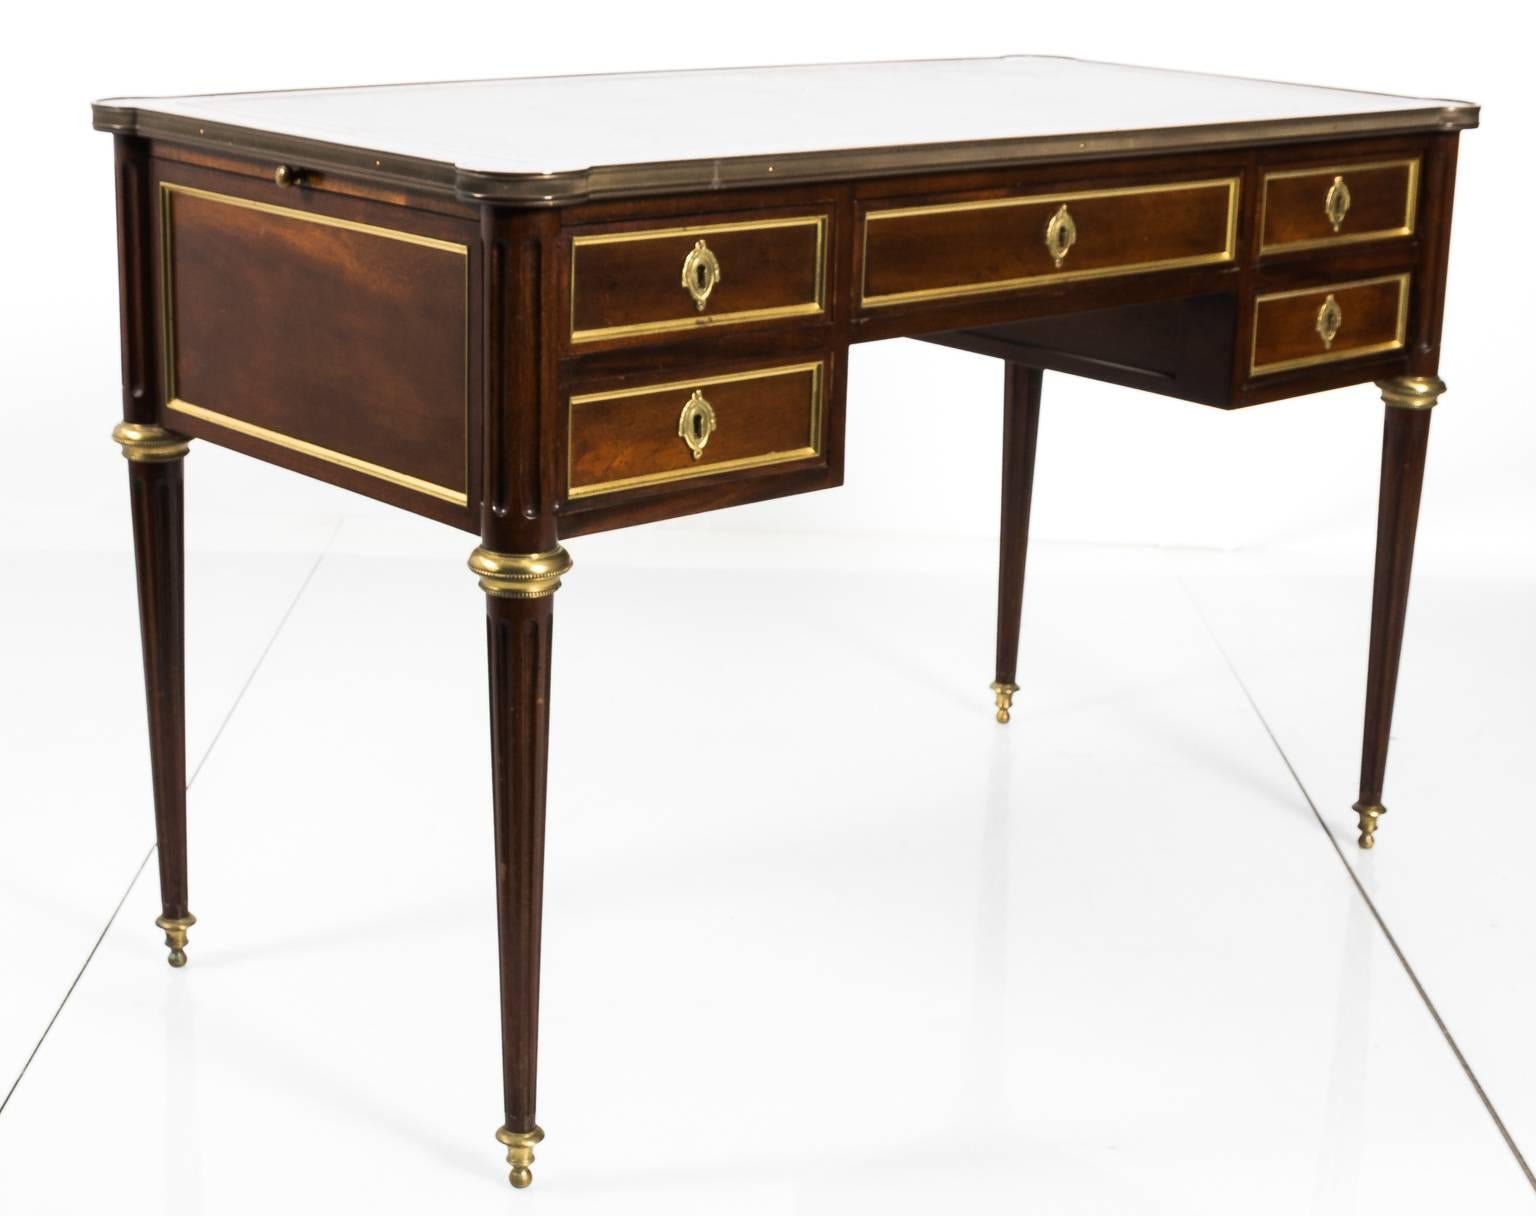 Louis XV style partner's desk that features a leather embossed top, decorative brass escutcheons and tapered fluted legs. Note that the leather top has minor scratches and wear, circa 19th century.
 